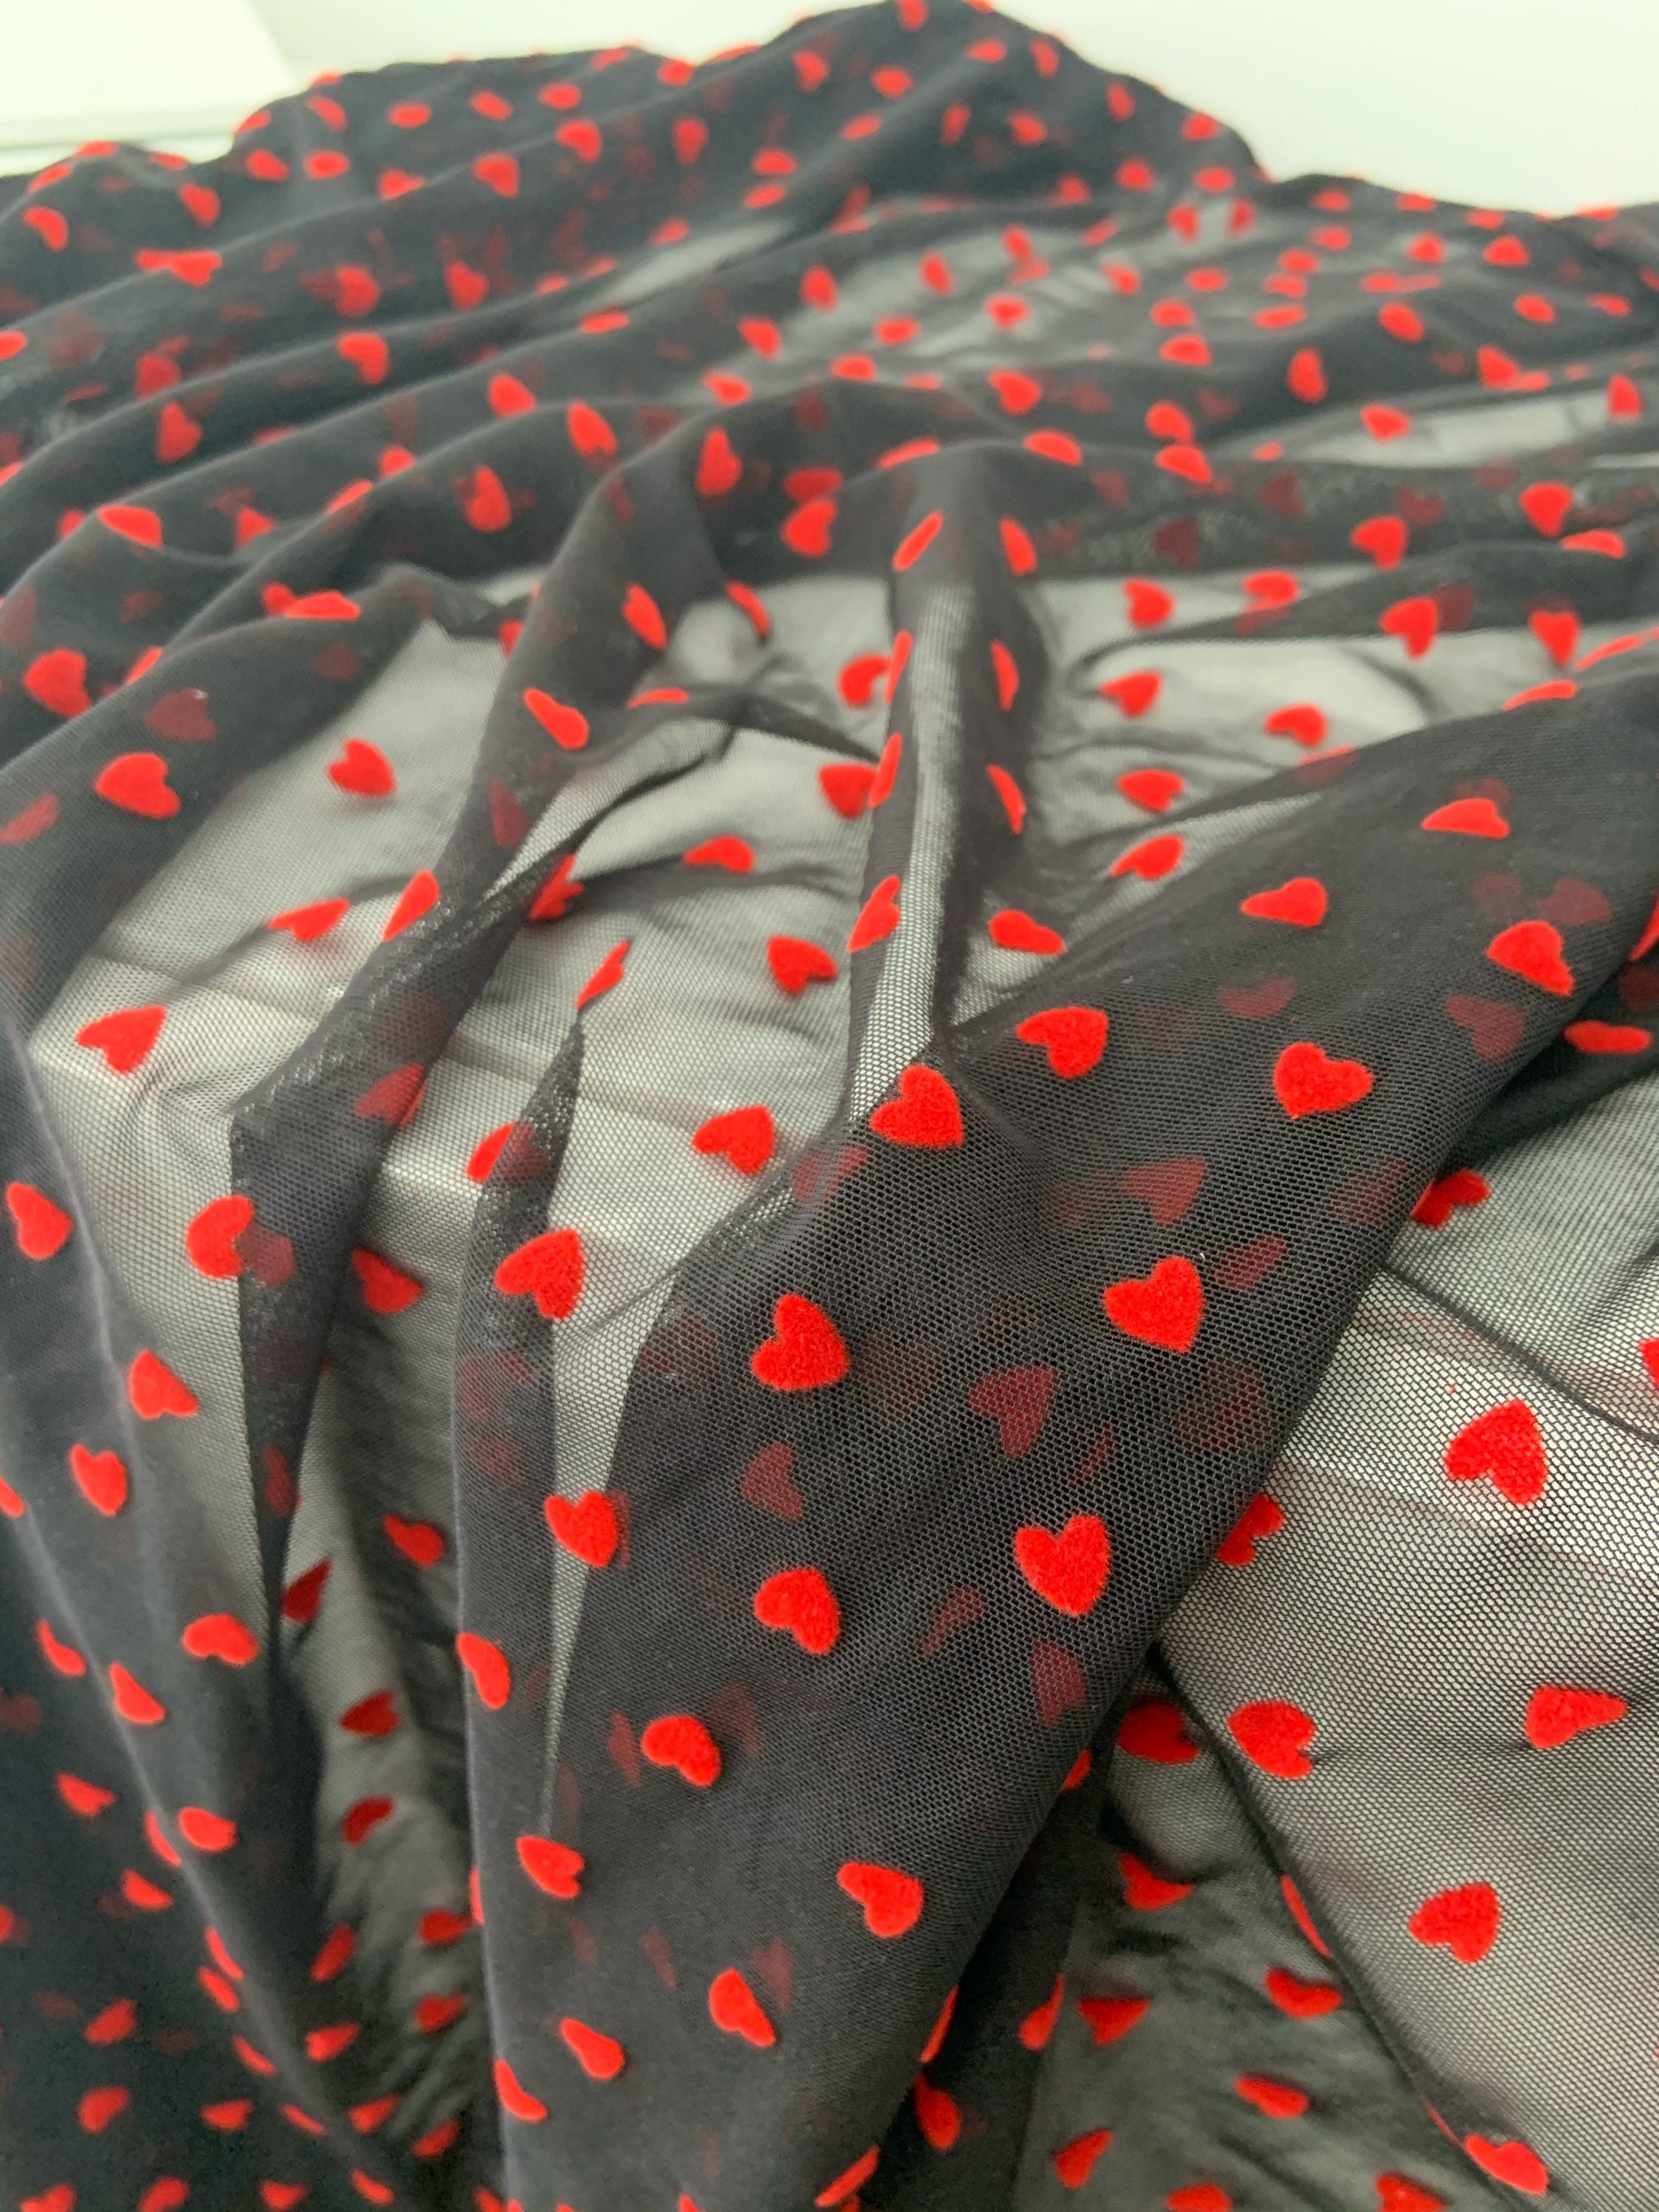 4 Way Stretch Tulle Fabric With Red Velvet Hearts, Pink Stretchy Mesh Fabric,  Elastic Tulle Fabric, Smooth, Well Drape -  Canada